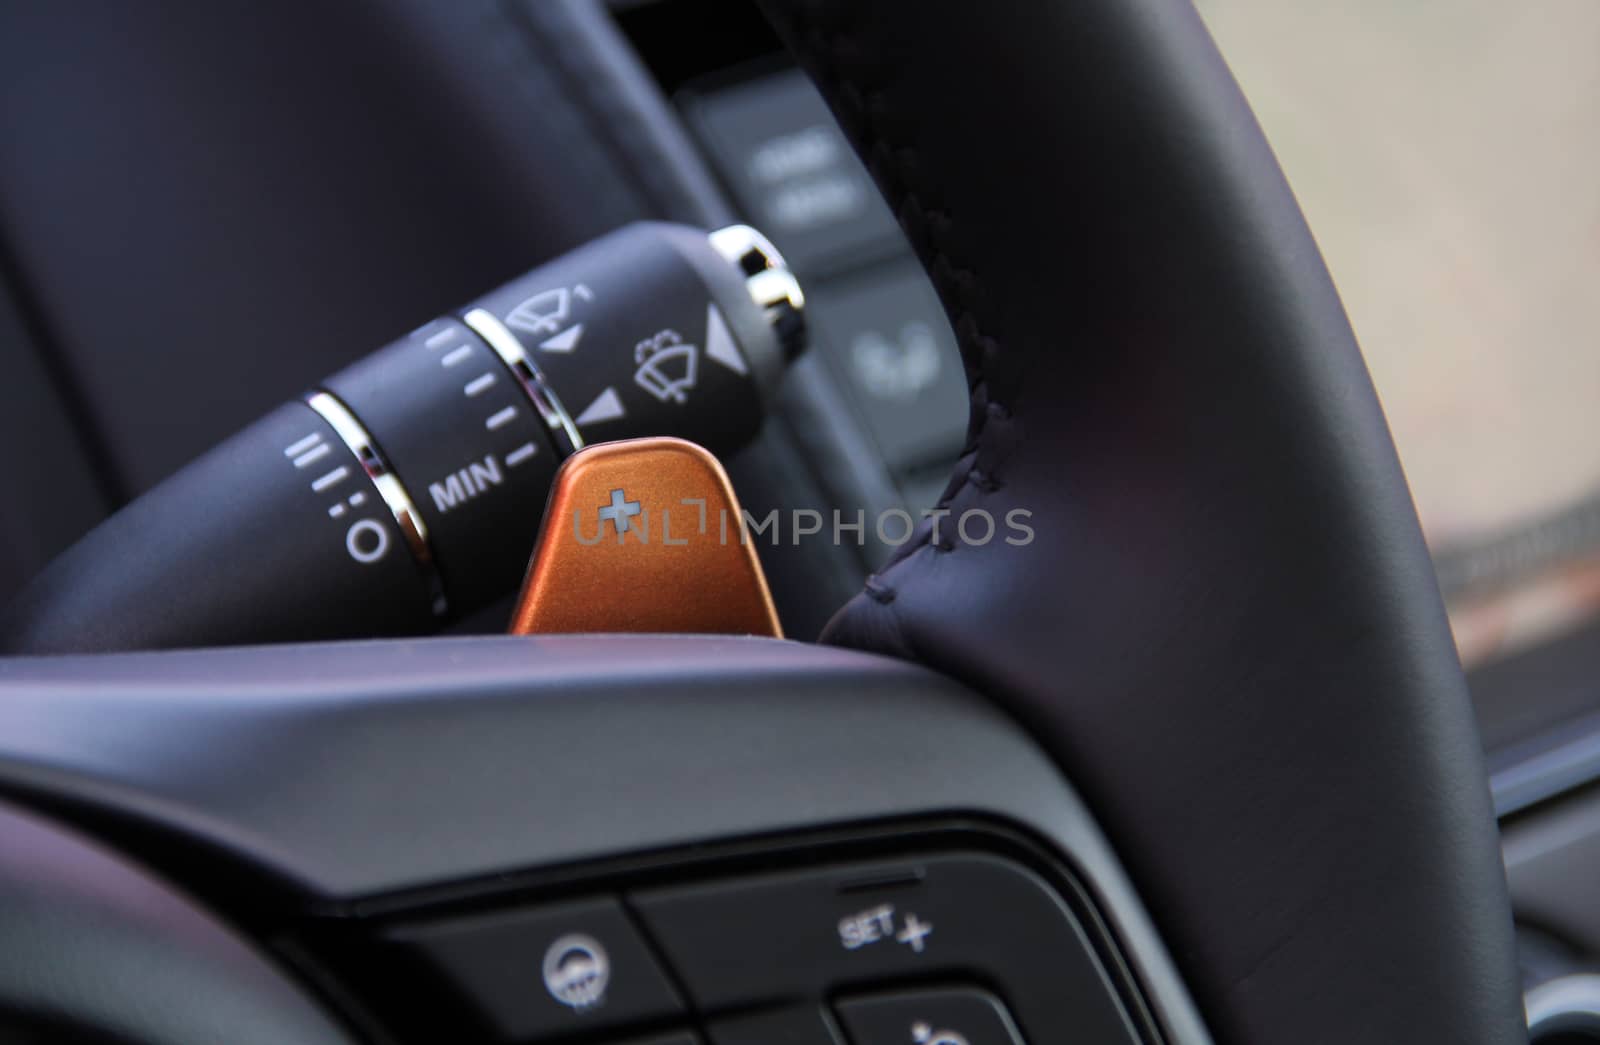 manual gear changing stick on a car's steering wheel, car interior detail